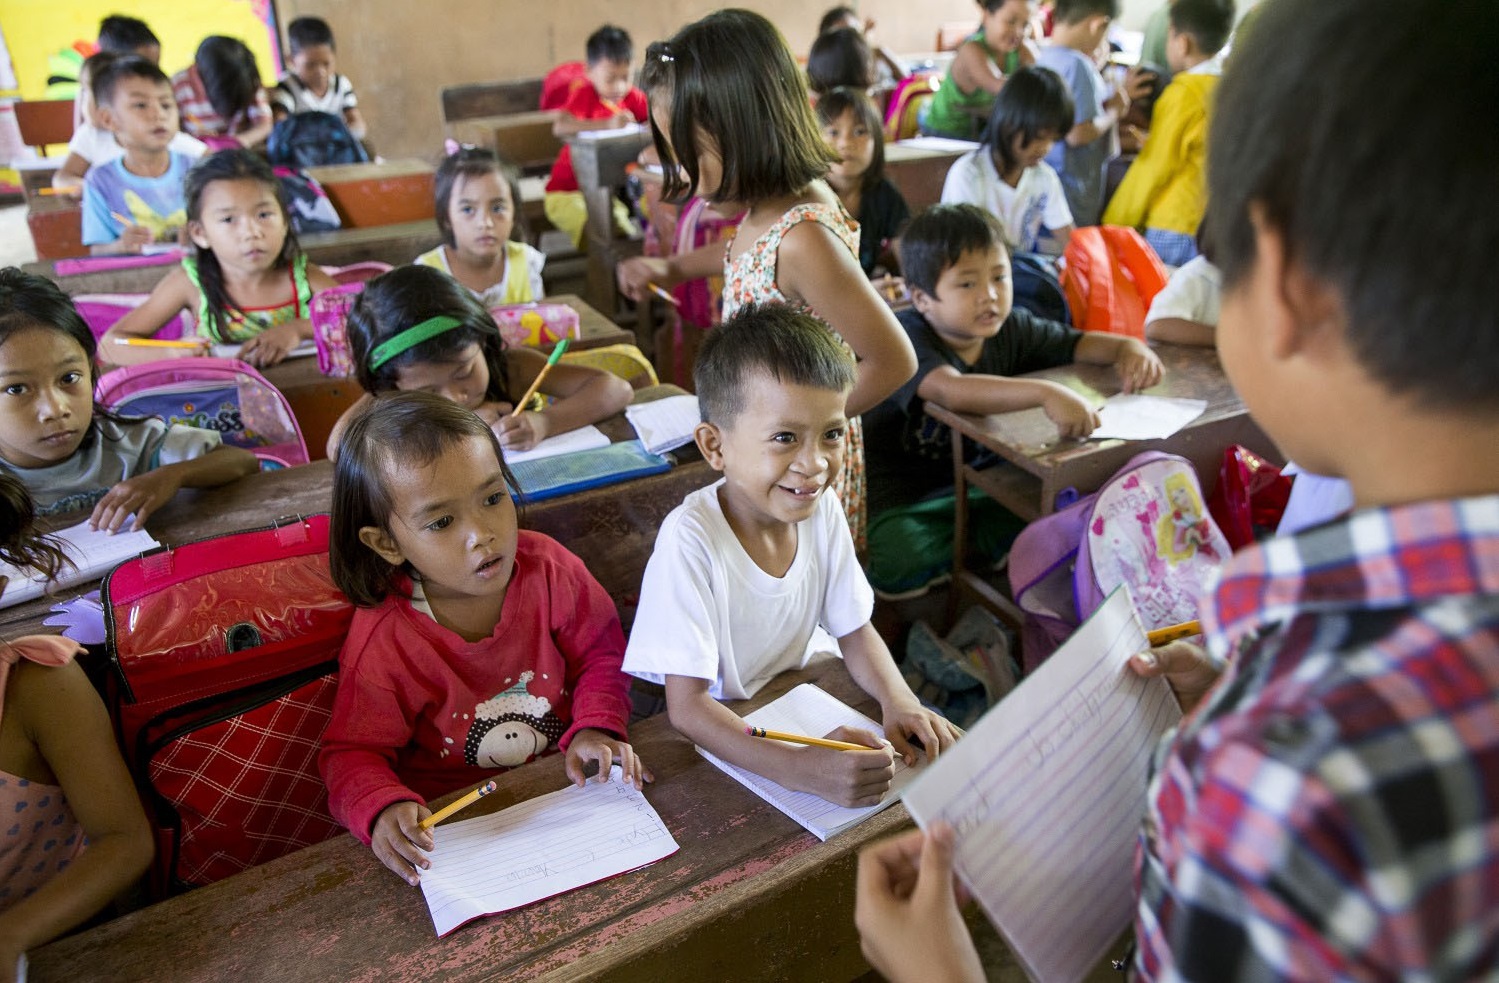 Young boy smiles in class among other students in a rural setting